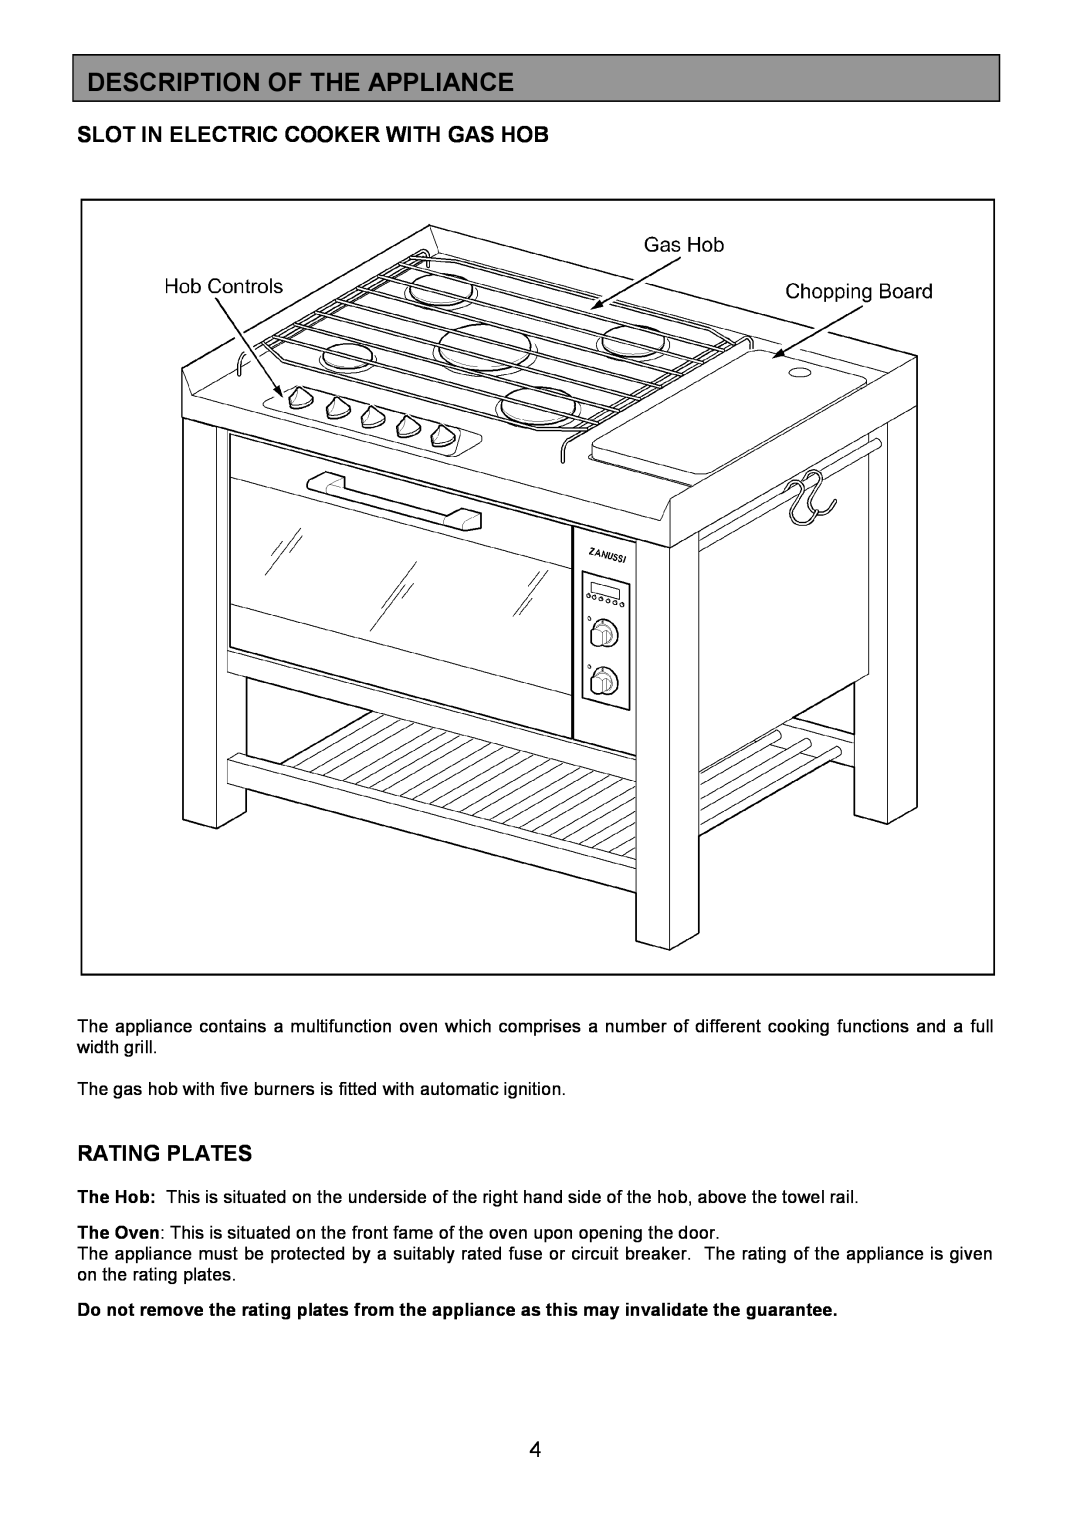 Zanussi ZCM 1000X manual Description Of The Appliance, Slot In Electric Cooker With Gas Hob, Rating Plates 